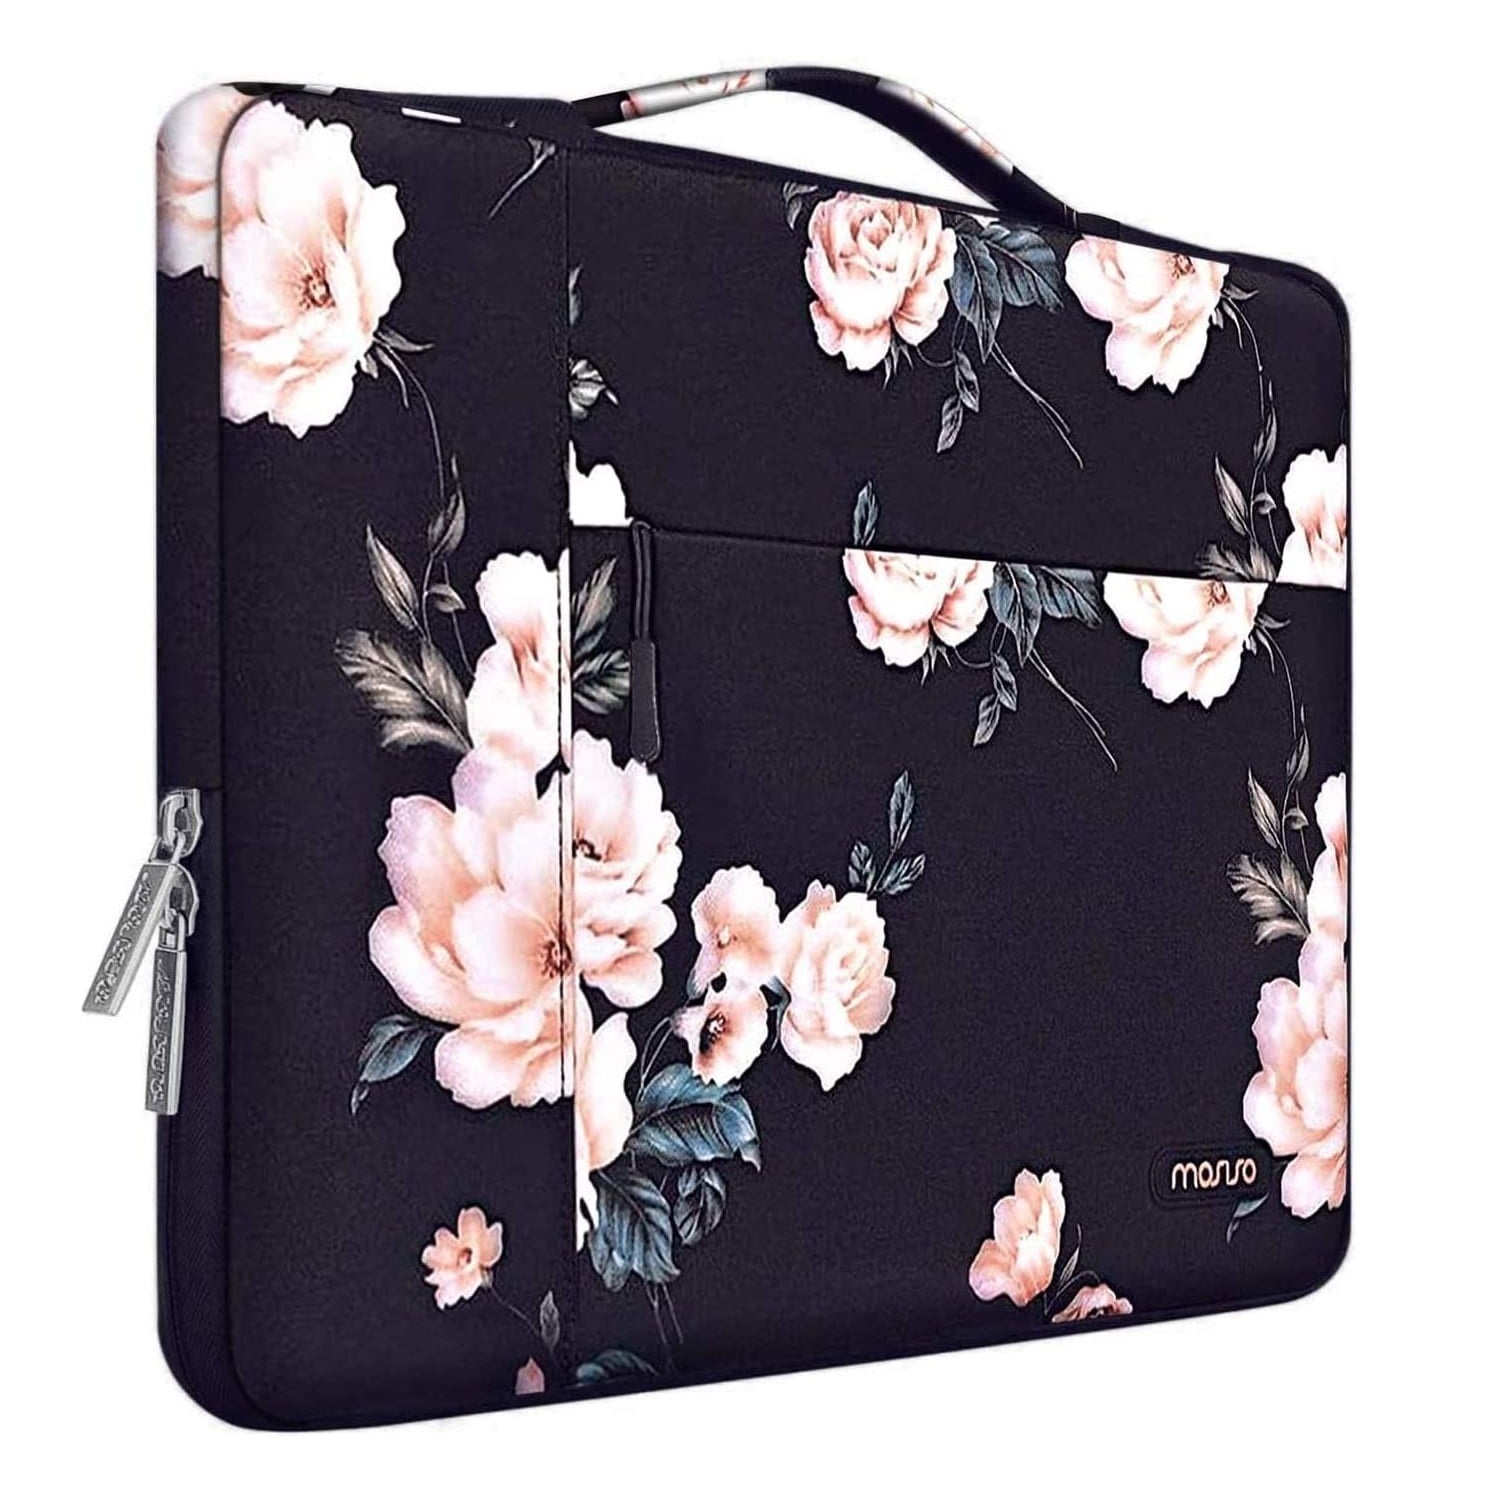 Polyester Multifunctional Carrying Sleeve Case Cover Bag MacBook Pro Notebook Computer Elephant Navy Base MOSISO Laptop Briefcase Handbag Compatible 13-13.3 Inch MacBook Air 